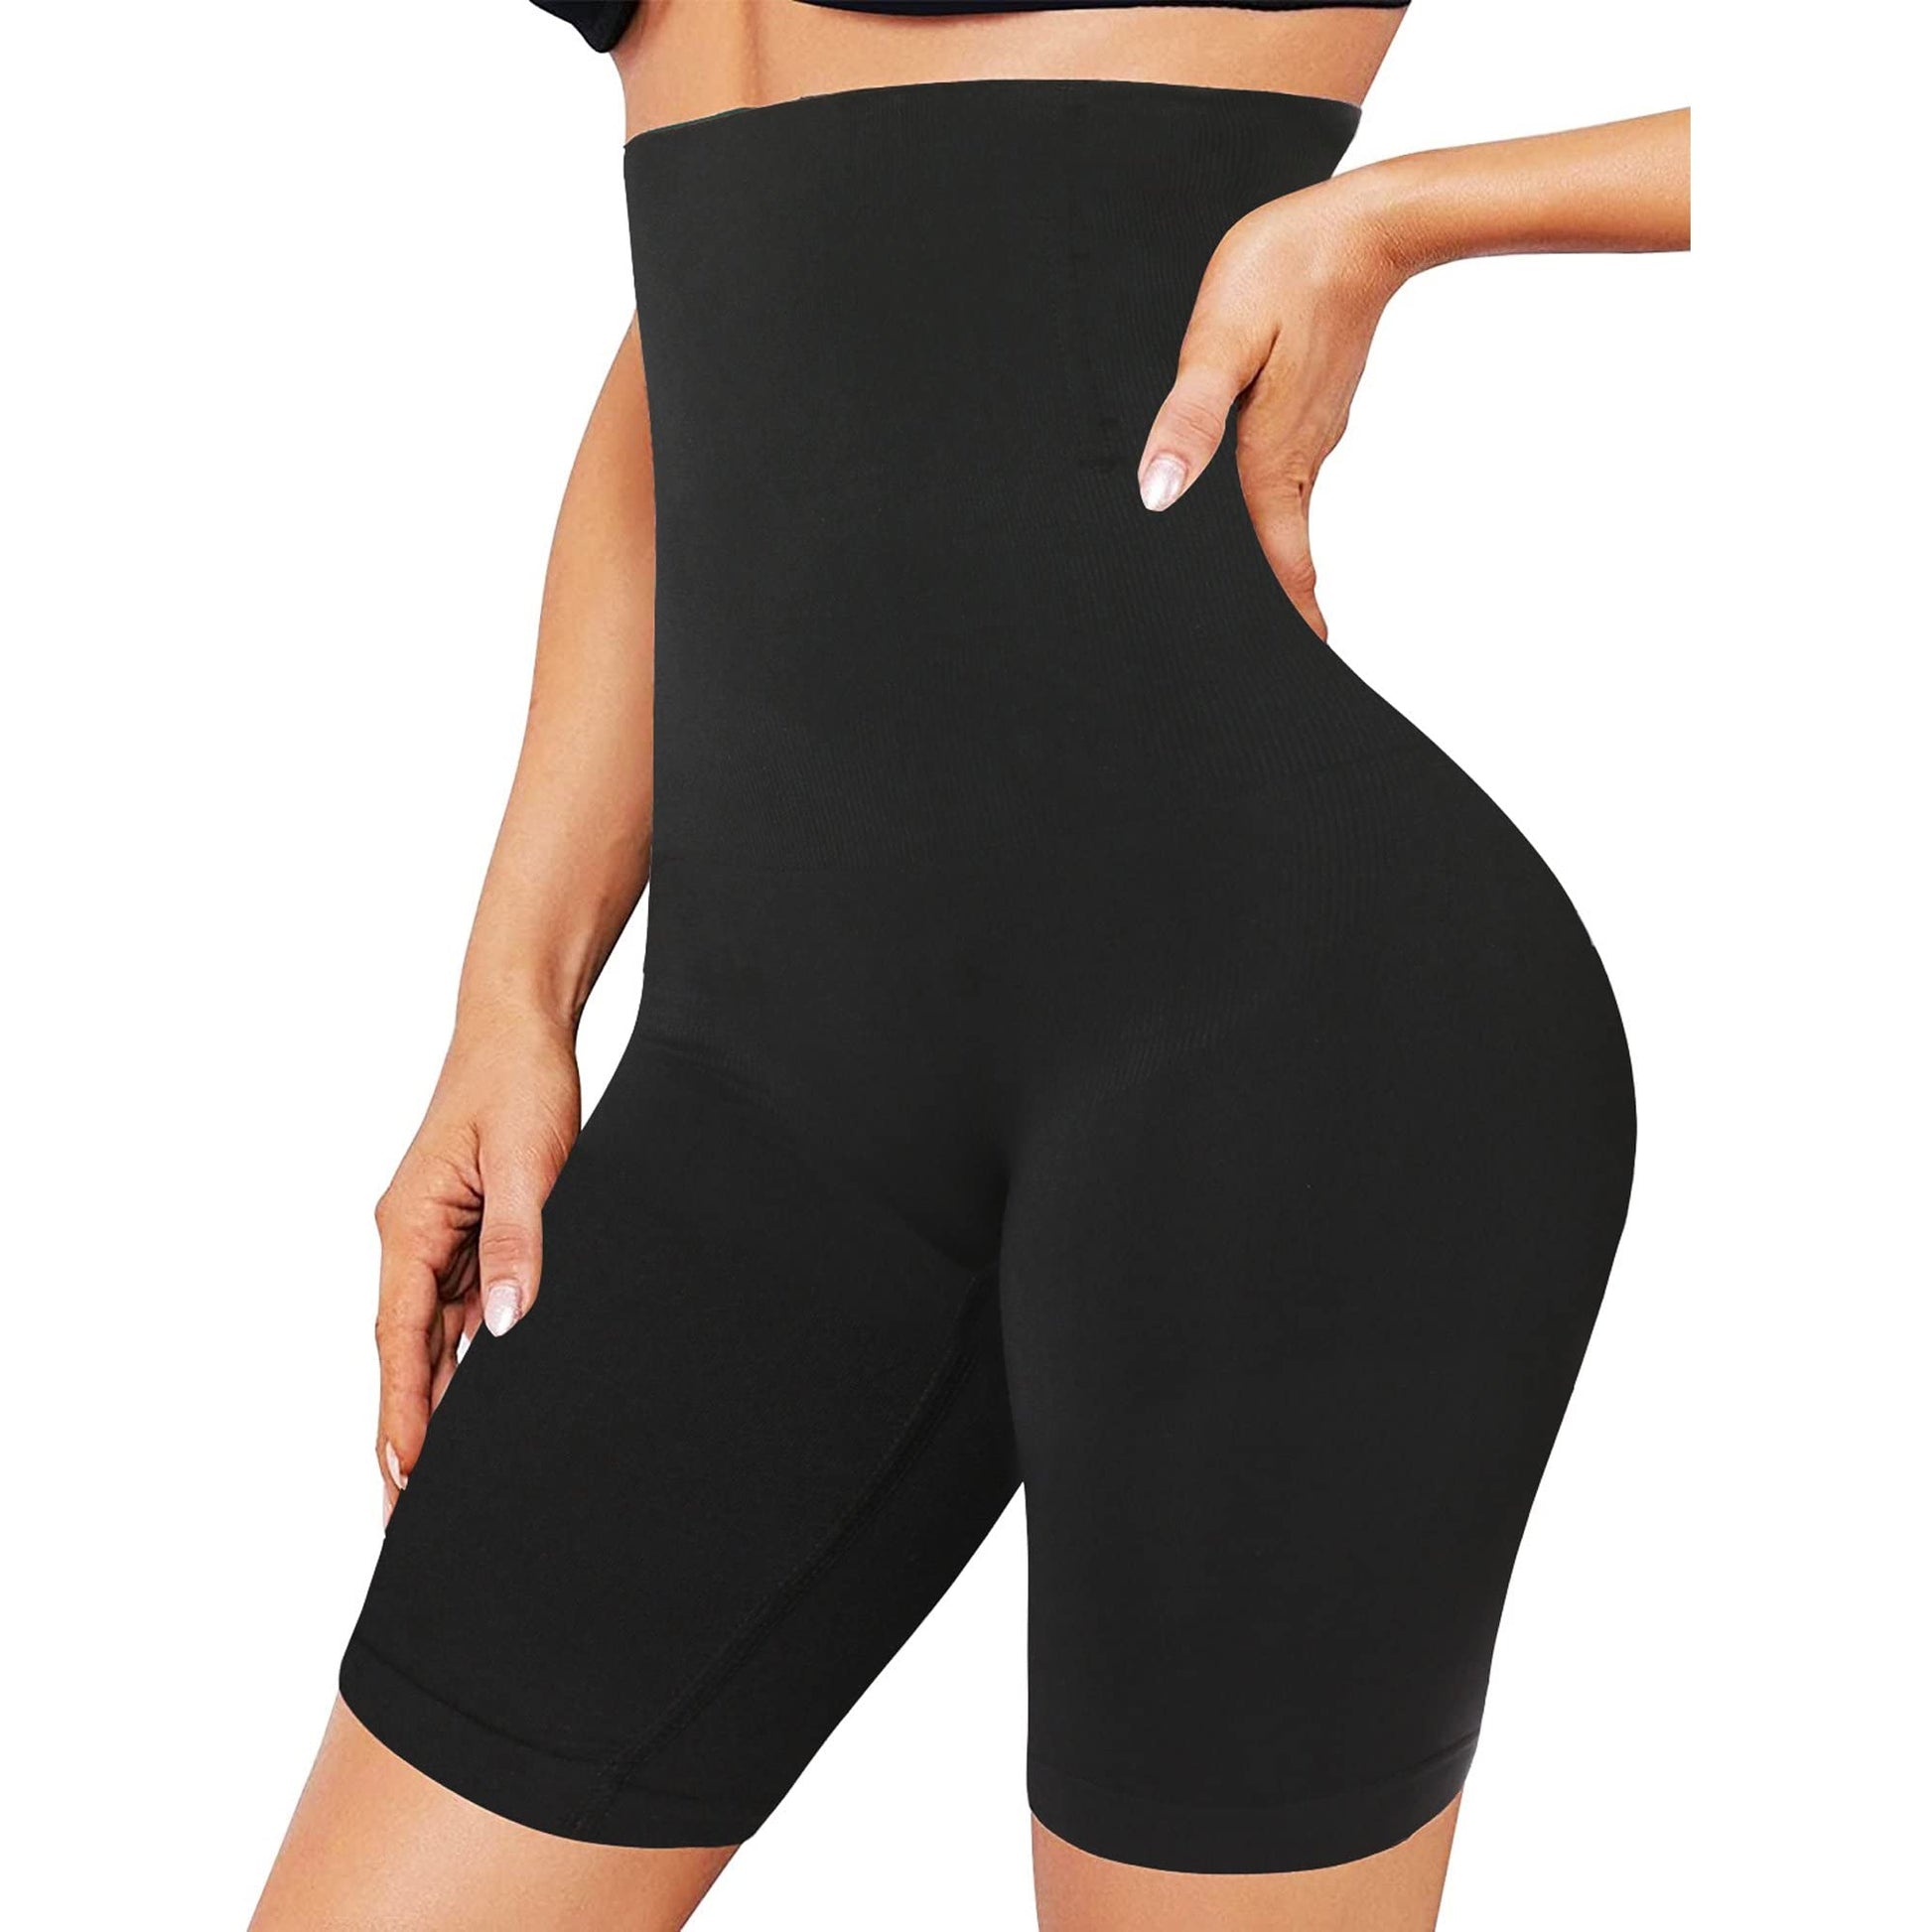 Buy Women's High-waisted Leggings Lifting Hip Spout Sass Pad Hips  Flat-angle Body-shaping Pants at affordable prices — free shipping, real  reviews with photos — Joom